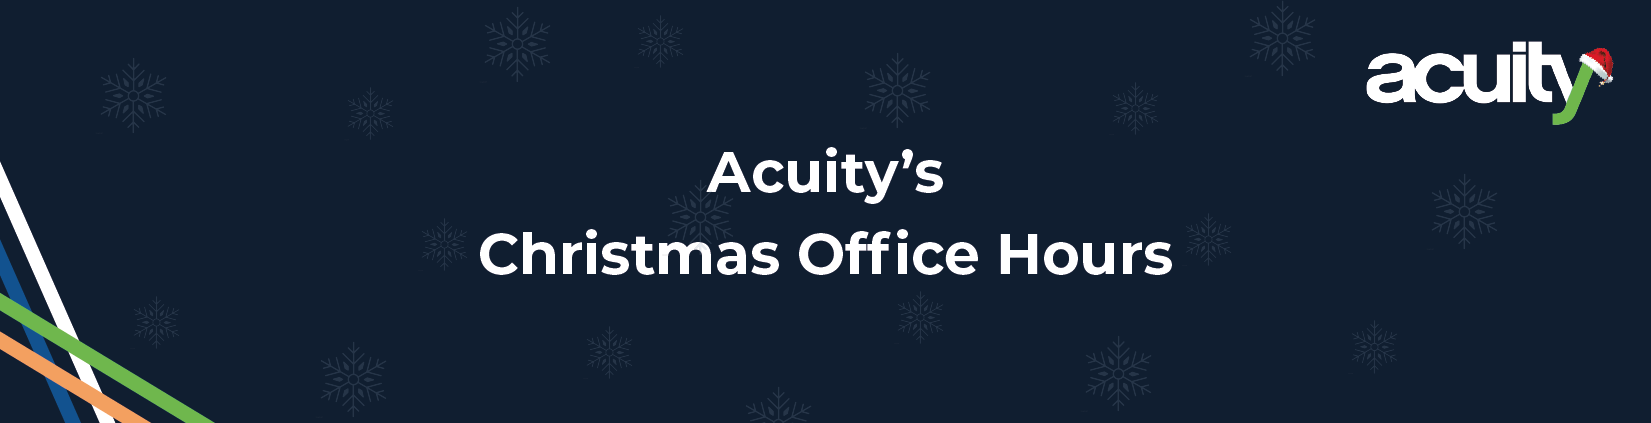 Acuity's Christmas office hours